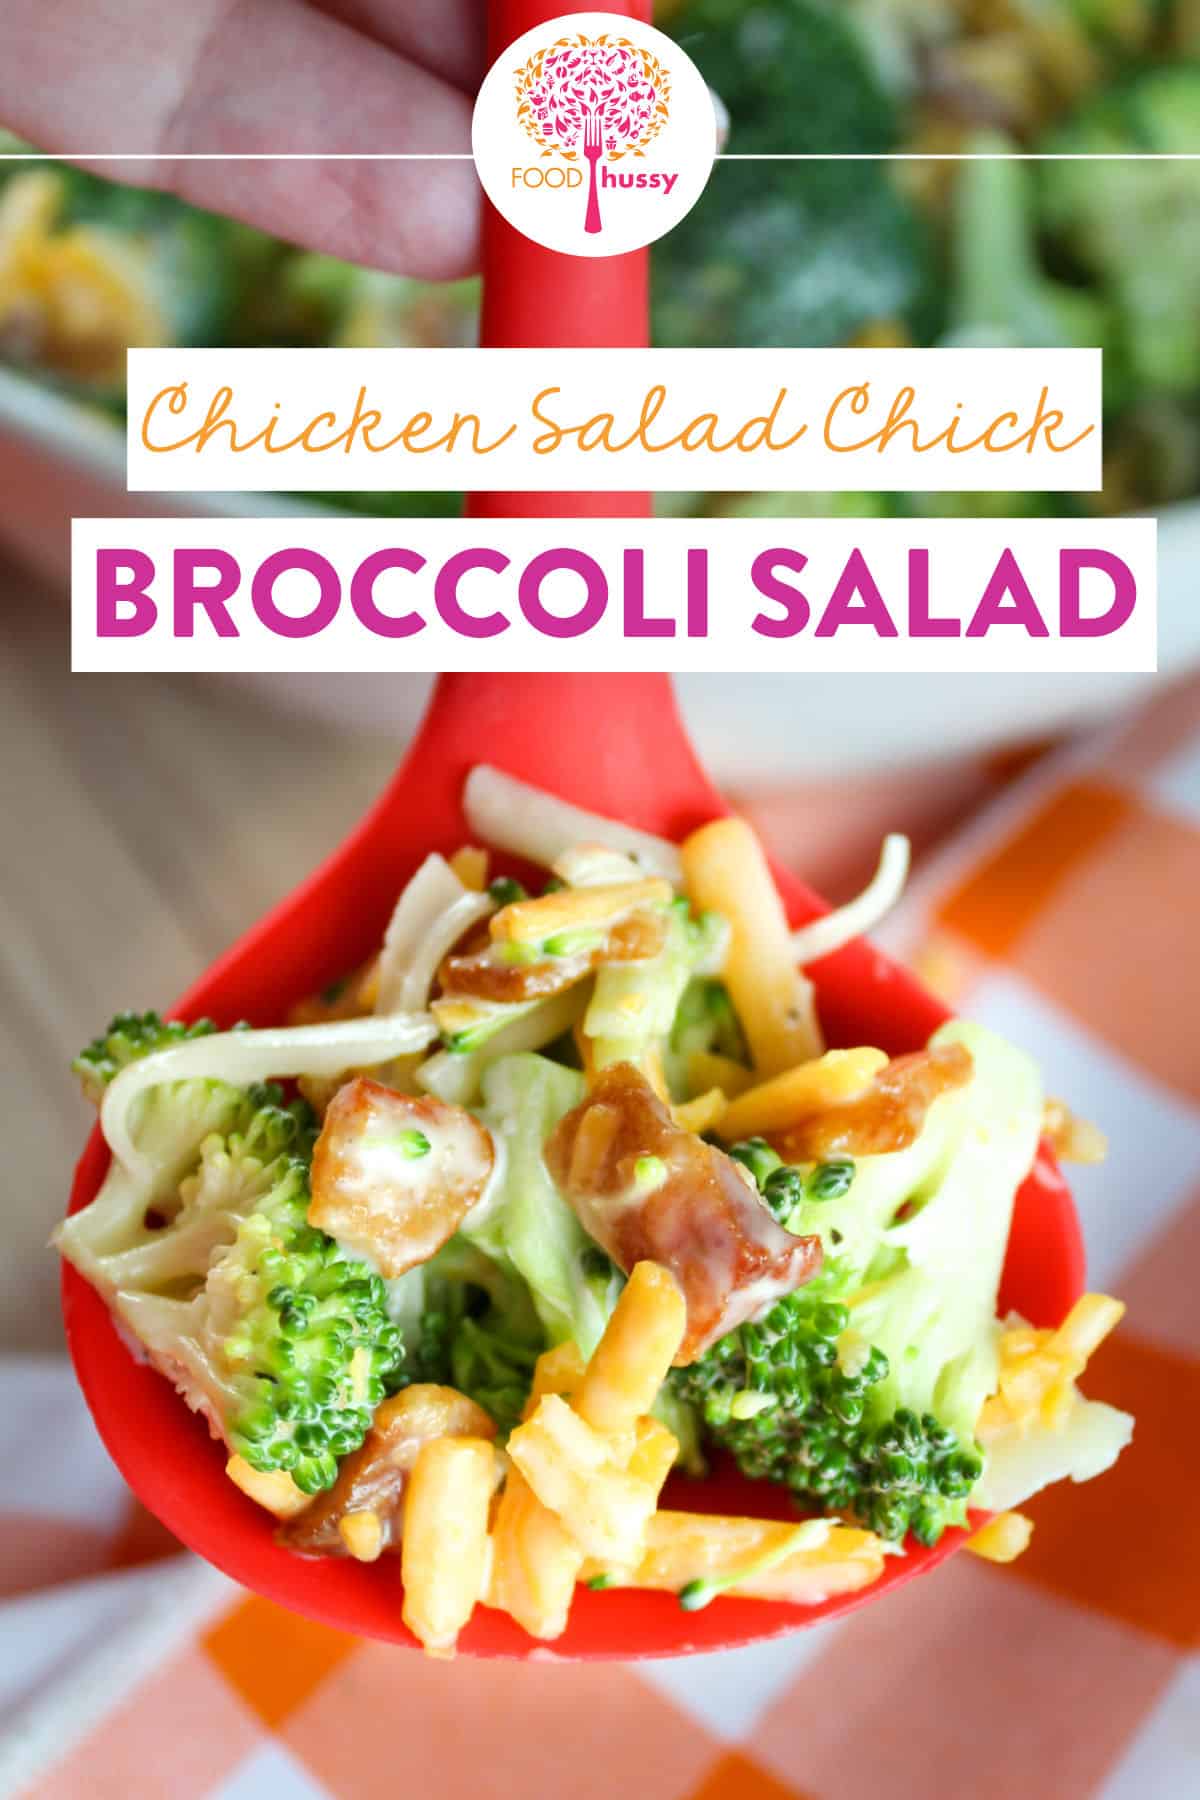 Chicken Salad Chick Broccoli Salad is my favorite restaurant side dish! It's crunchy, creamy, cheesy and bacon-y! How can you ask for anything better? This make-at-home recipe makes enough for the whole family and is the perfect dish for a potluck! via @foodhussy